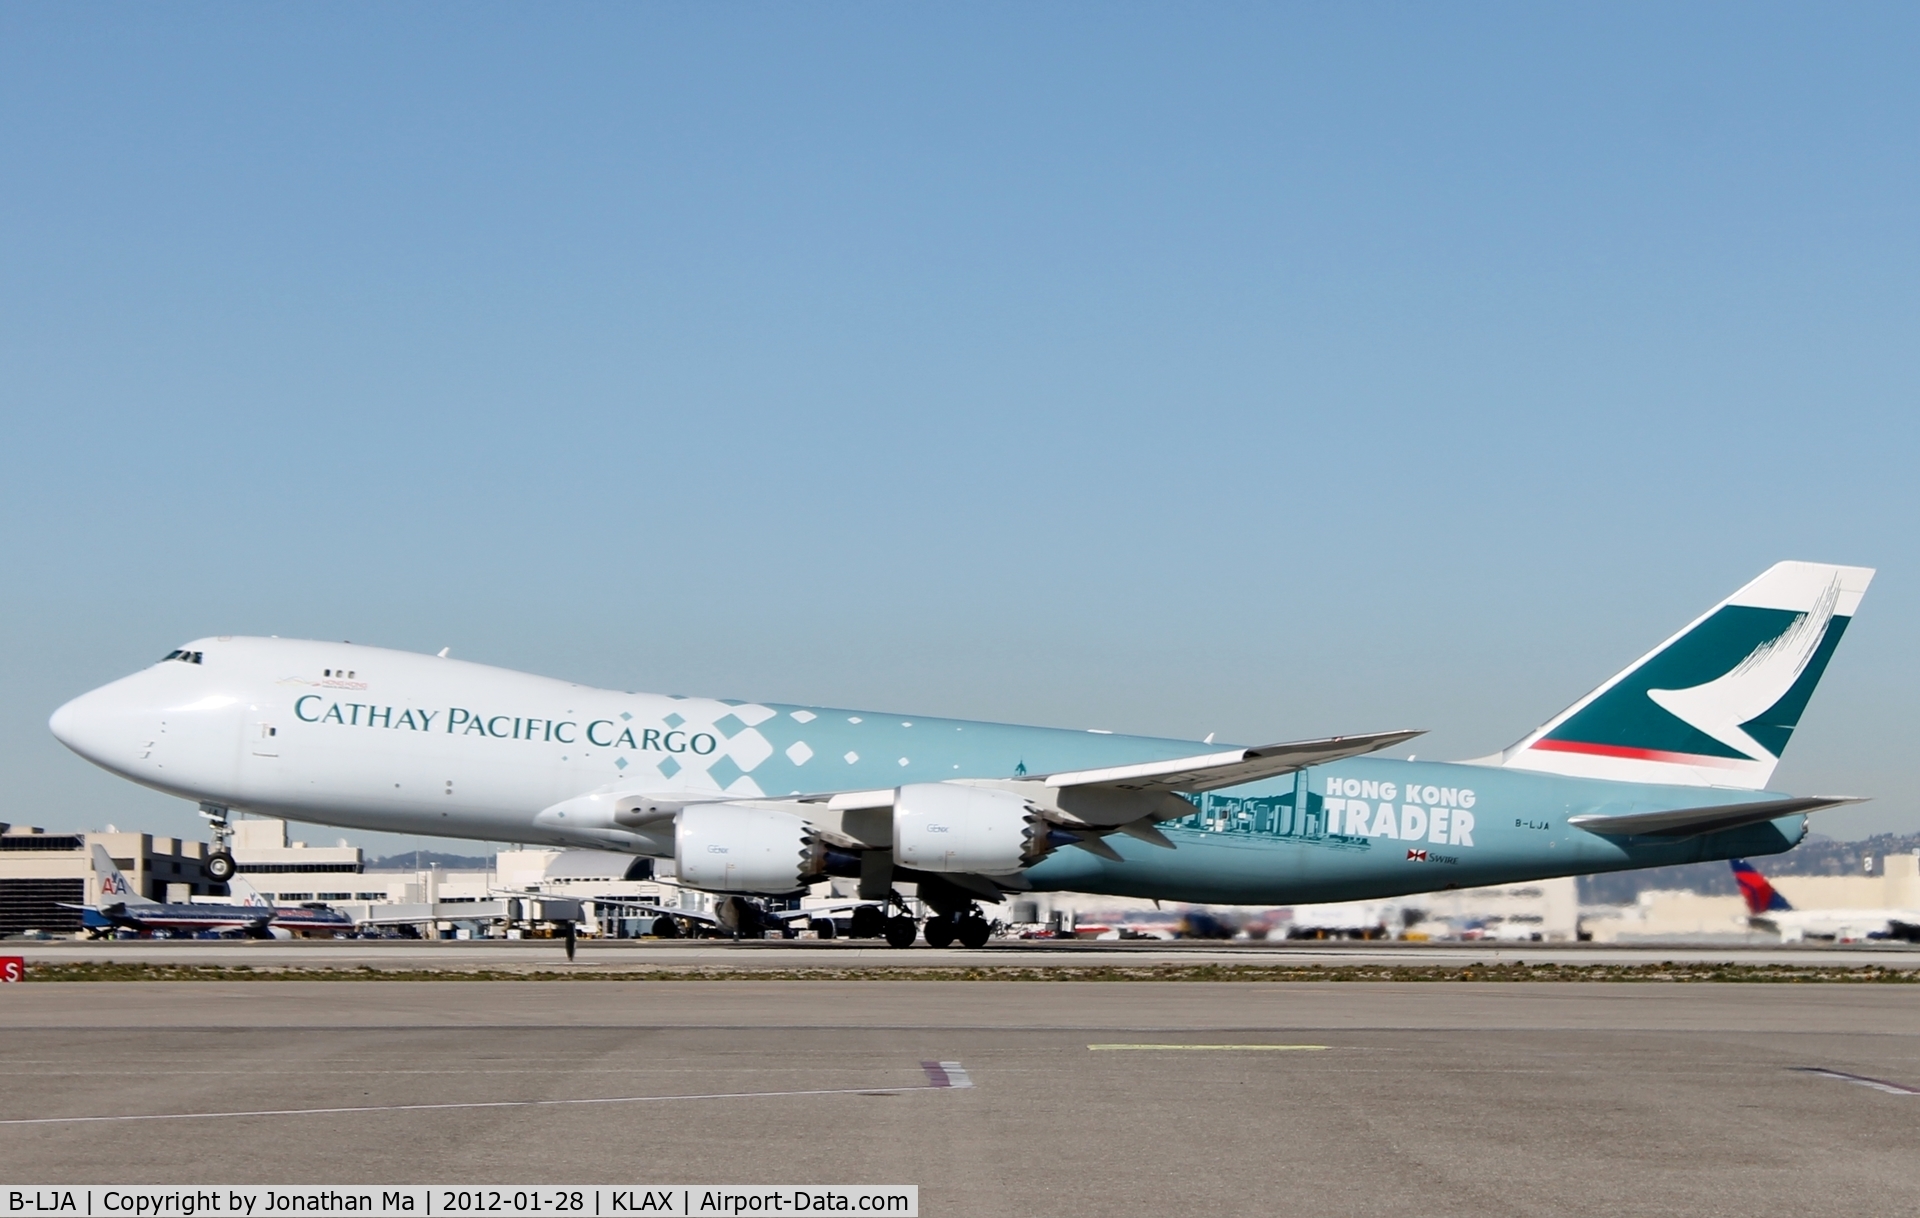 B-LJA, 2011 Boeing 747-867F/SCD C/N 39238, The Cathay Pacific Boeing 747-8F makes its first appearance at LAX